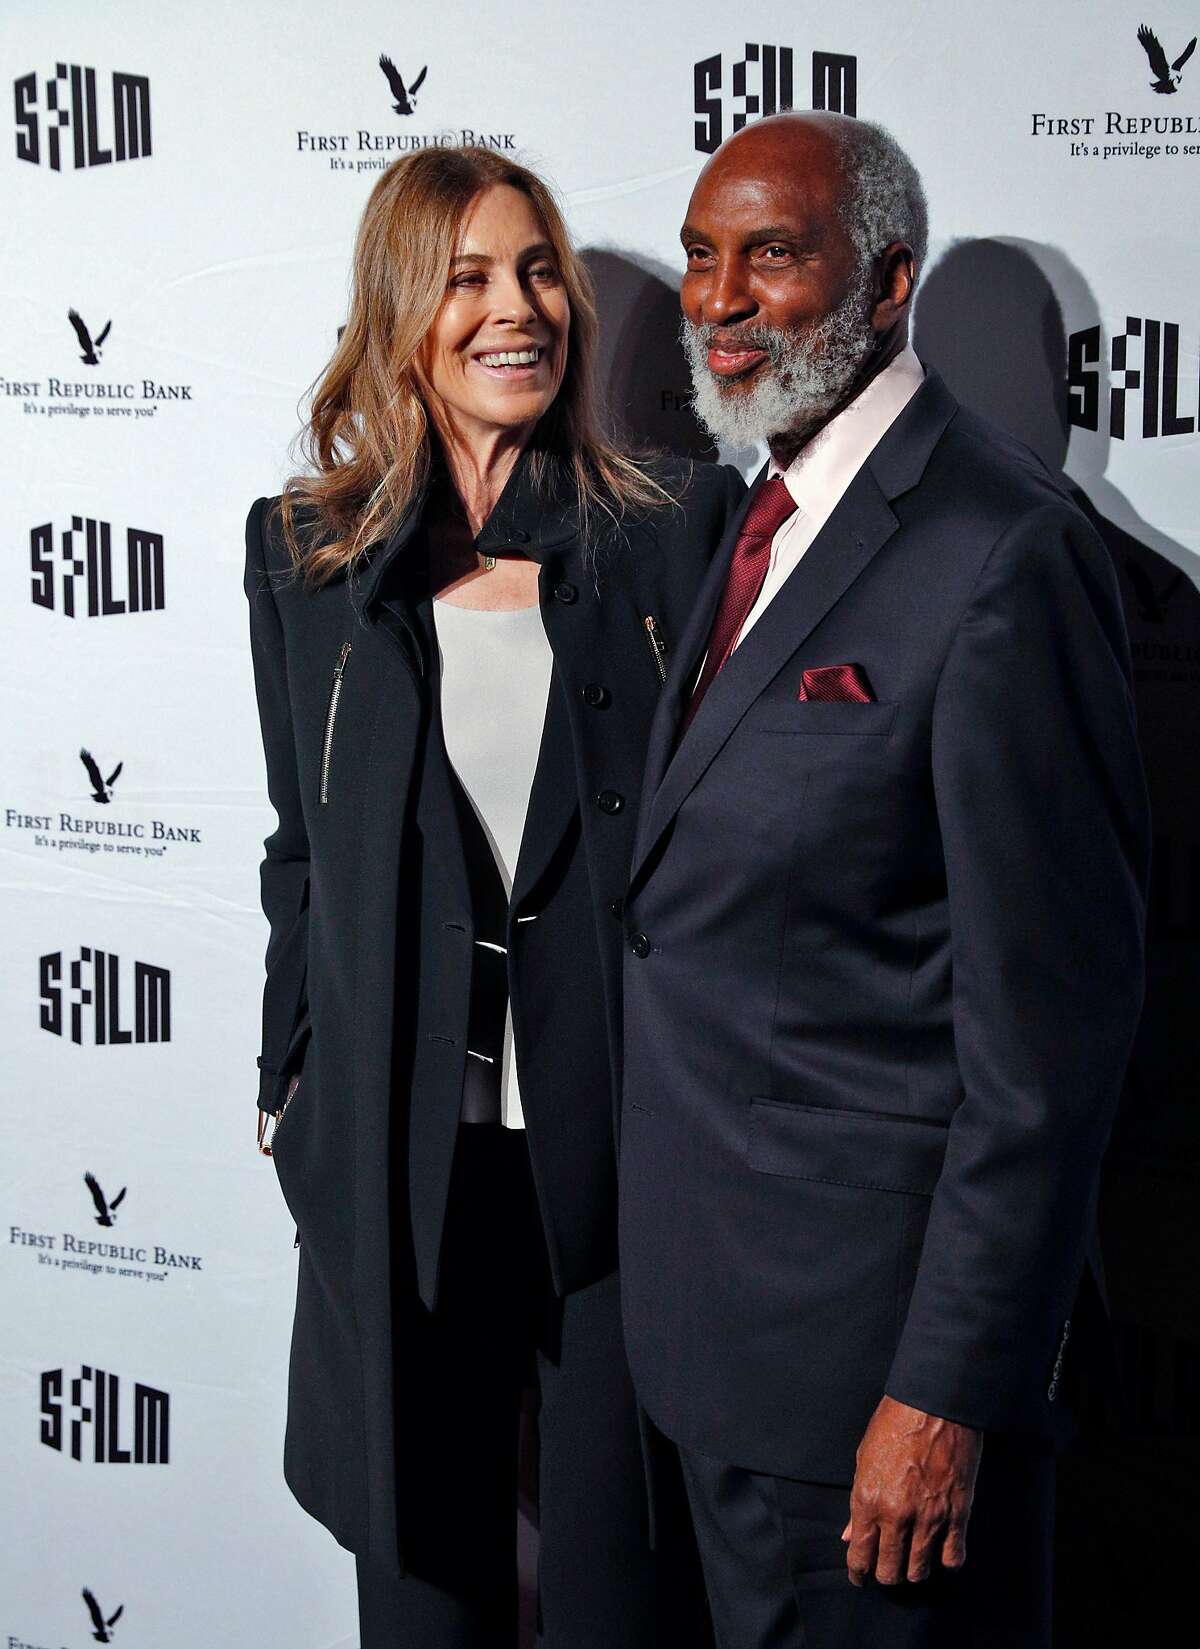 Kathryn Bigelow, left, poses with john a. powell during the SFFILM Awards Night at the Palace of Fine Arts Exhibition Center in San Francisco, Calif., on Tuesday, December 5, 2017. Kathryn Bigelow was awarded the Irving M. Levin Award for Film Direction, Kate Winslet the Peter J. Owens Award for Acting, and Emily V. Gordon and Kumail Nanjiani the Kanbar Award for Storytelling.